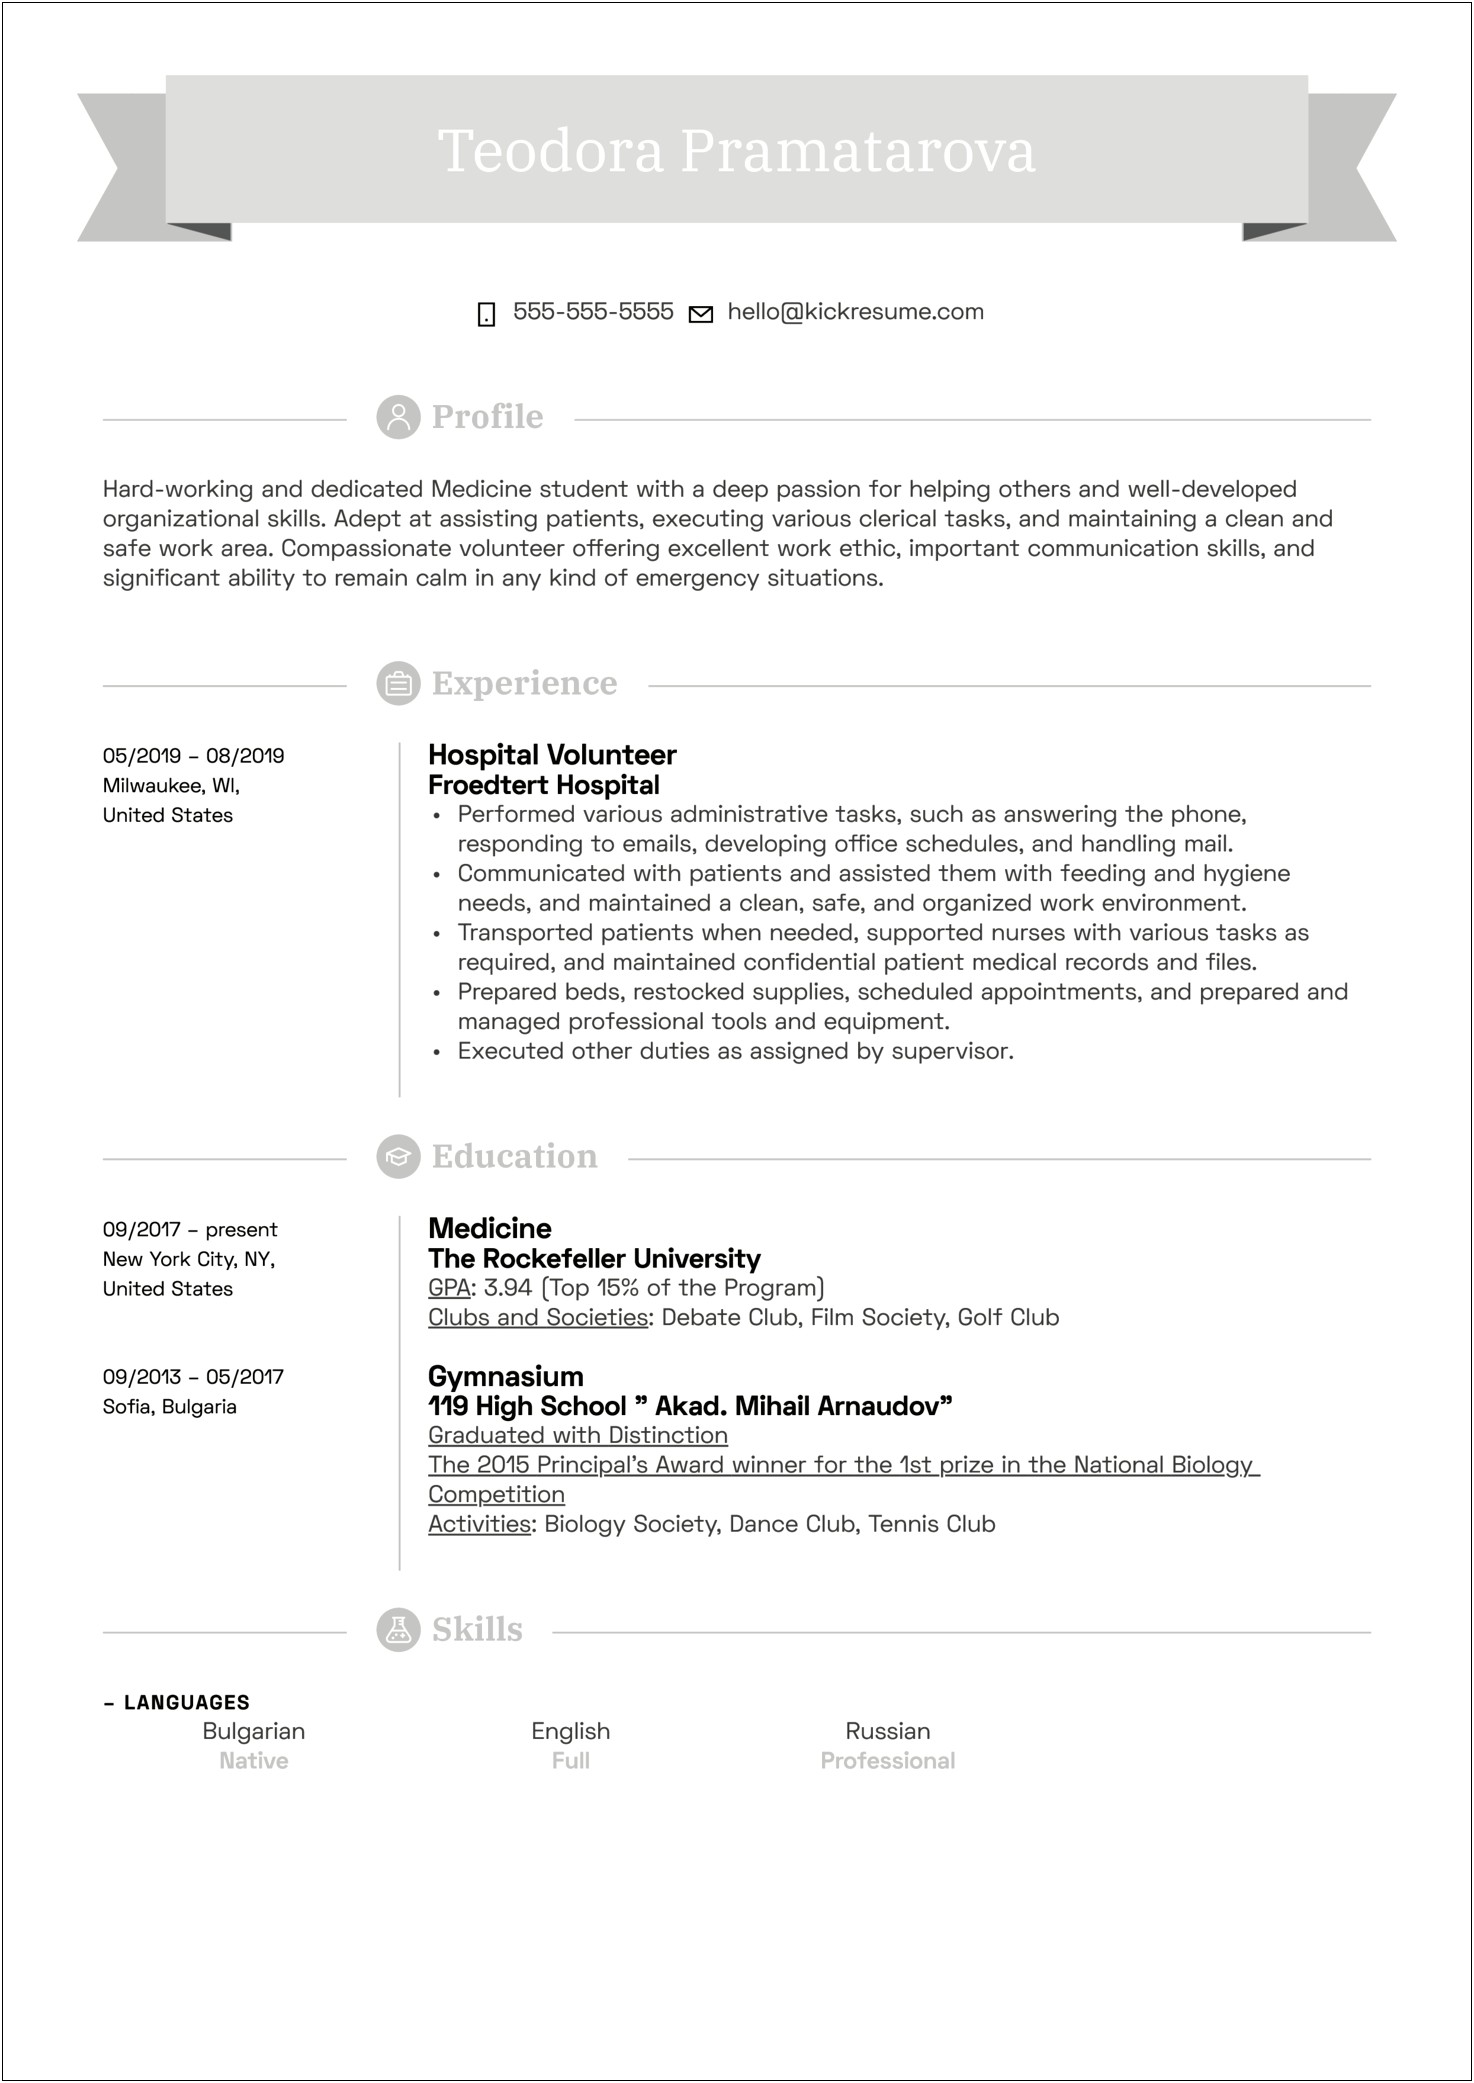 Resume Objective For Medical Student